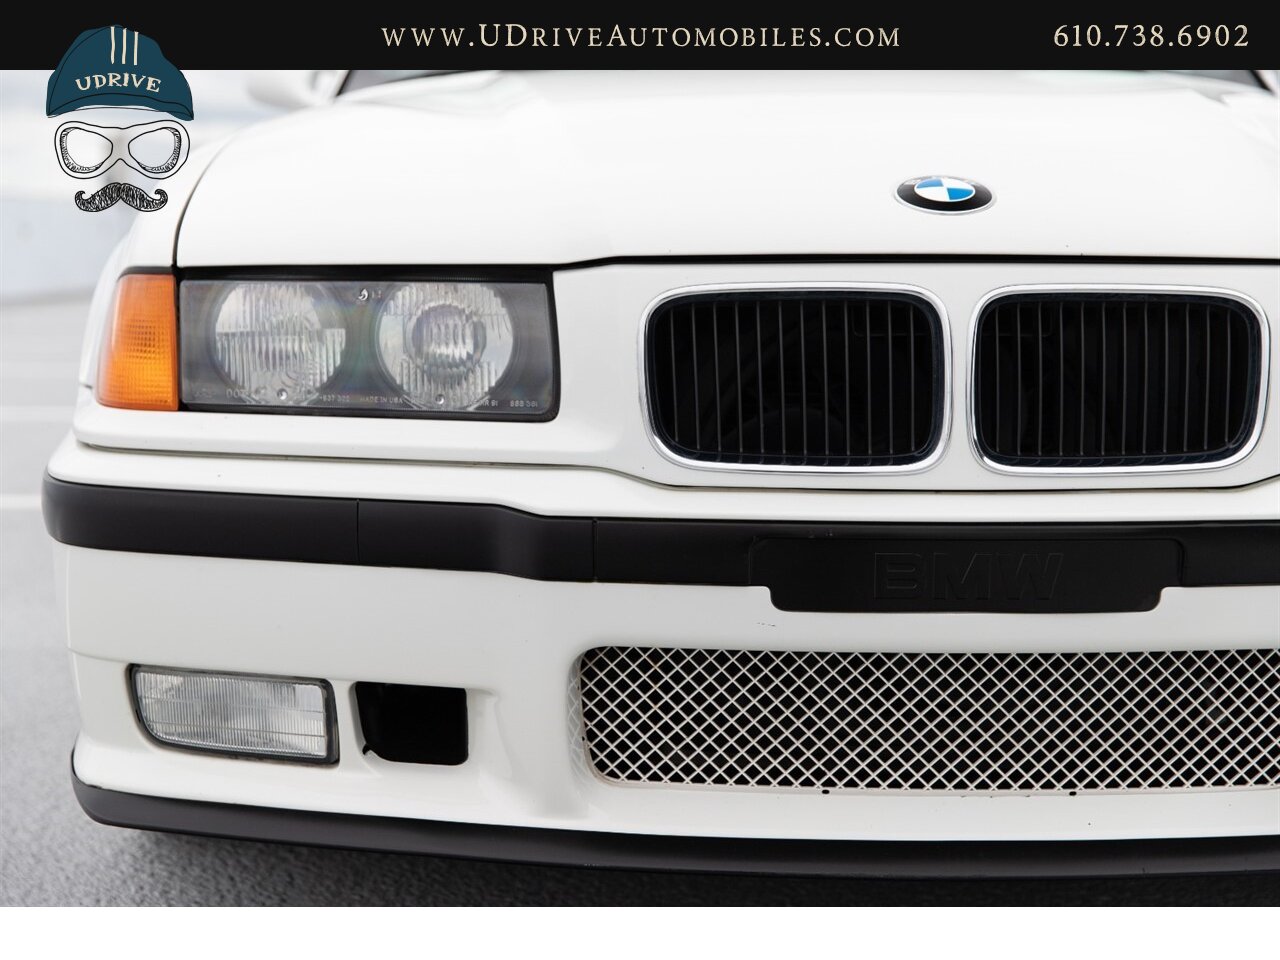 1995 BMW M3 E36 Alpine White over Black Vader Seats  5 Speed - Photo 12 - West Chester, PA 19382